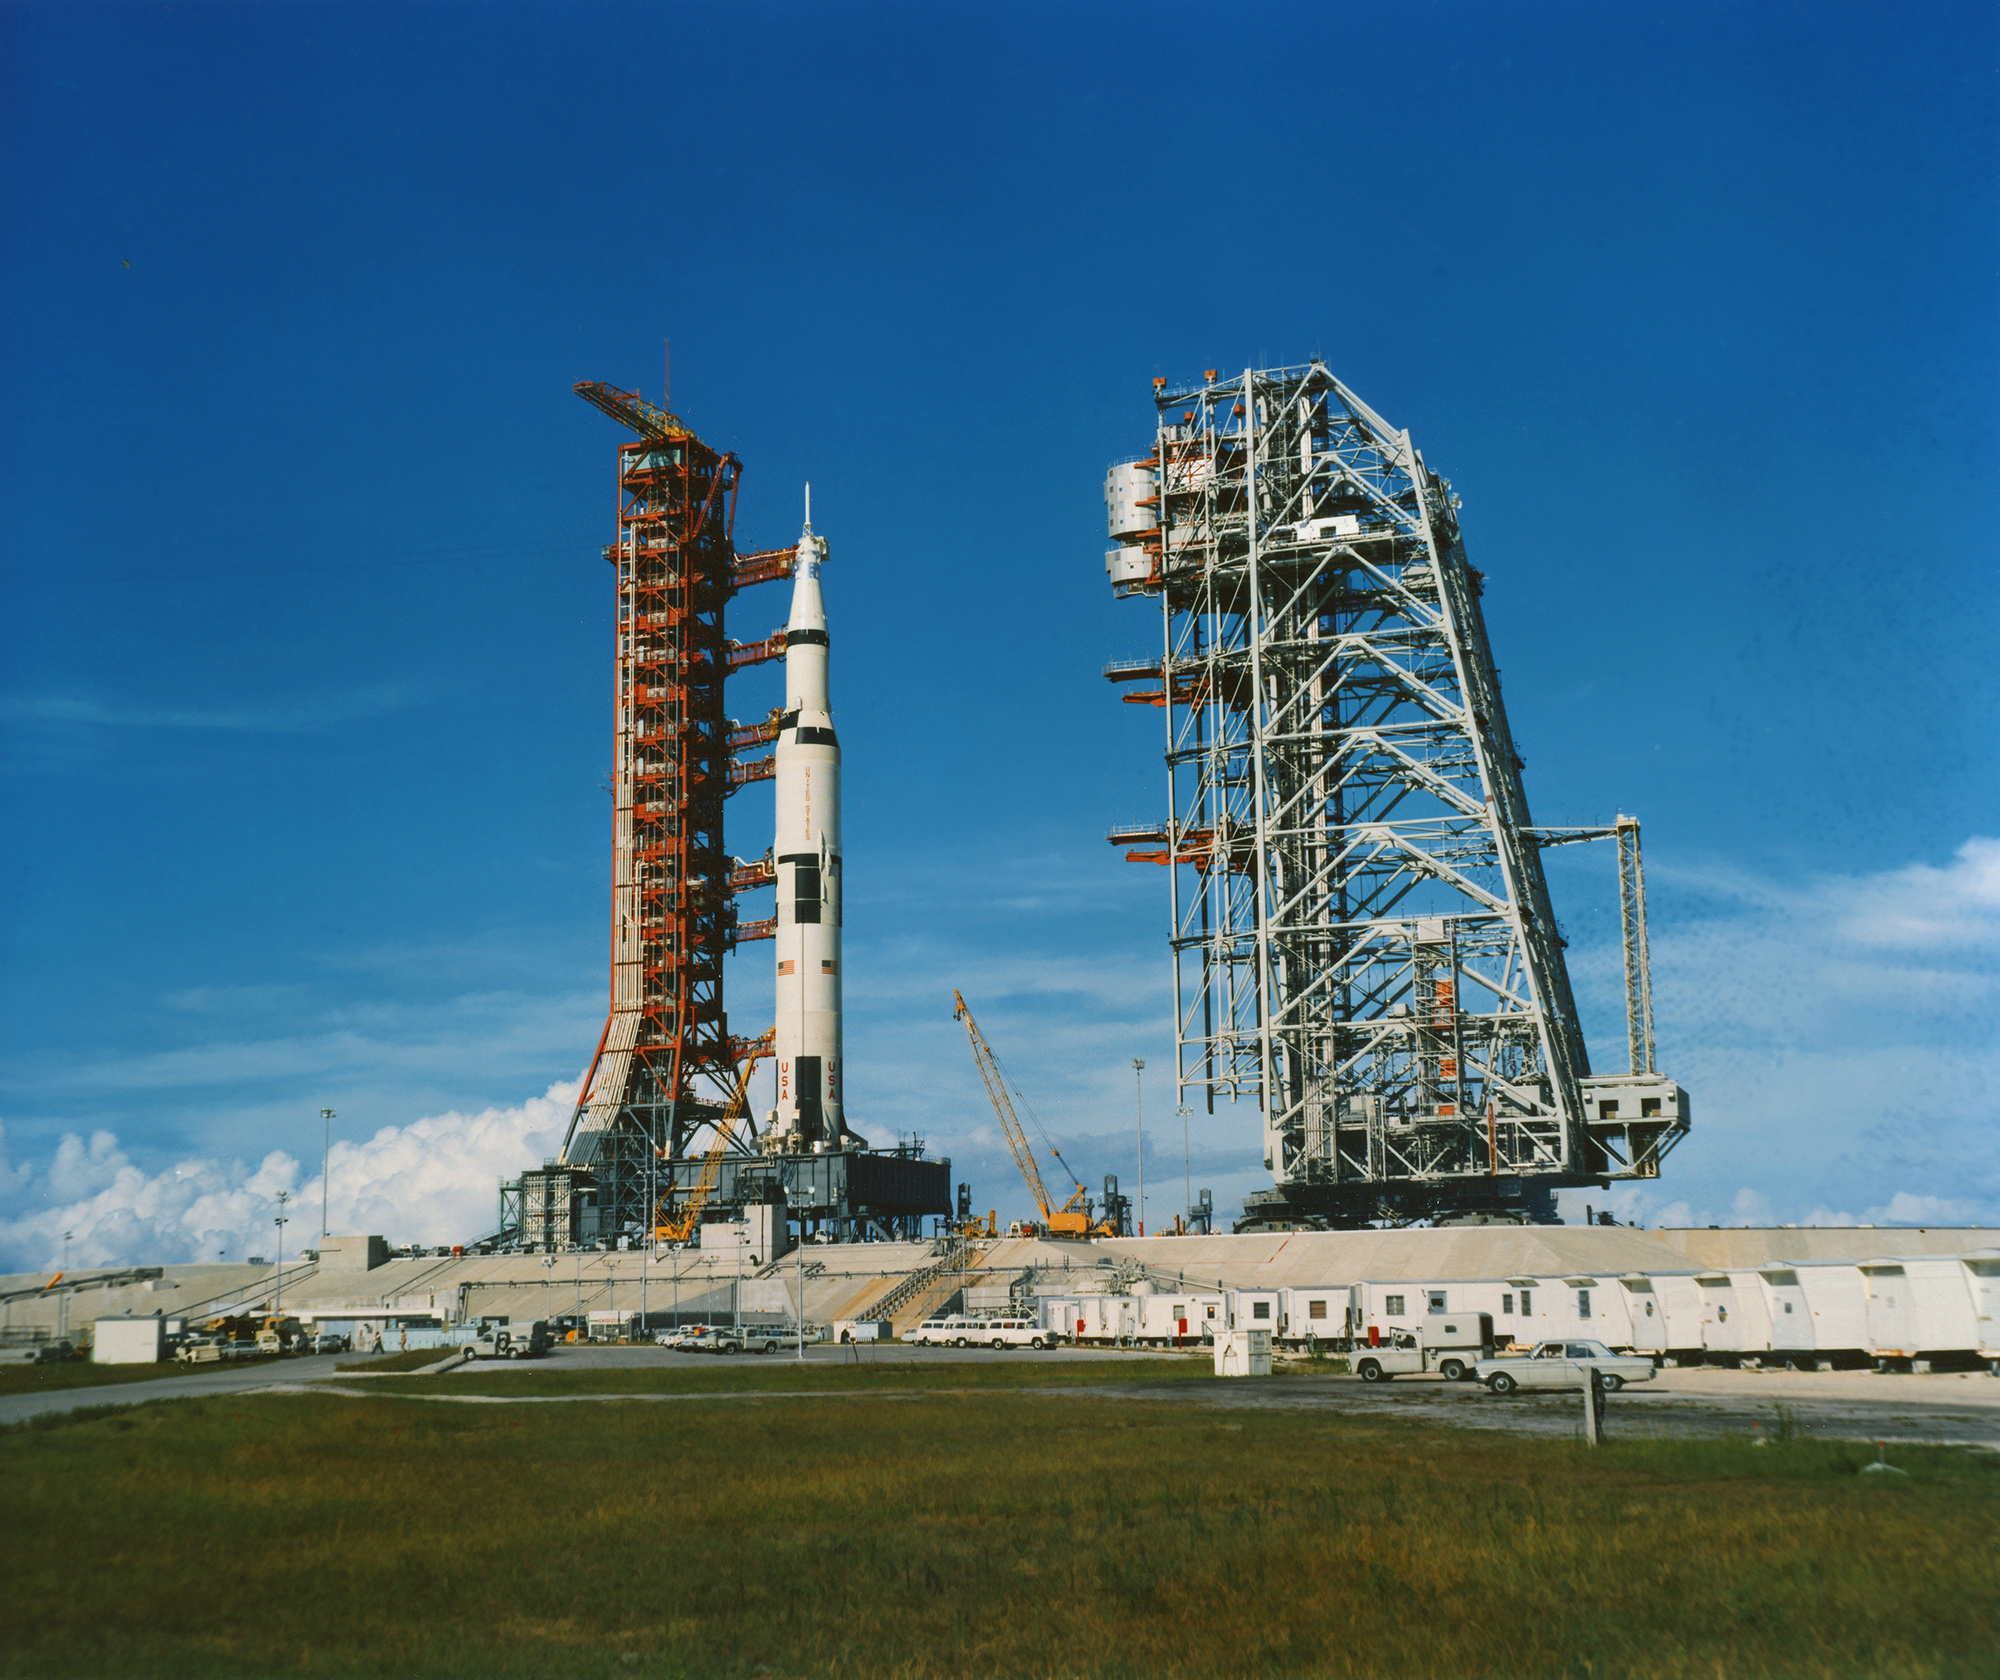 apollo-11-saturn-v-and-mobile-service-structure-at-pad-39.jpg